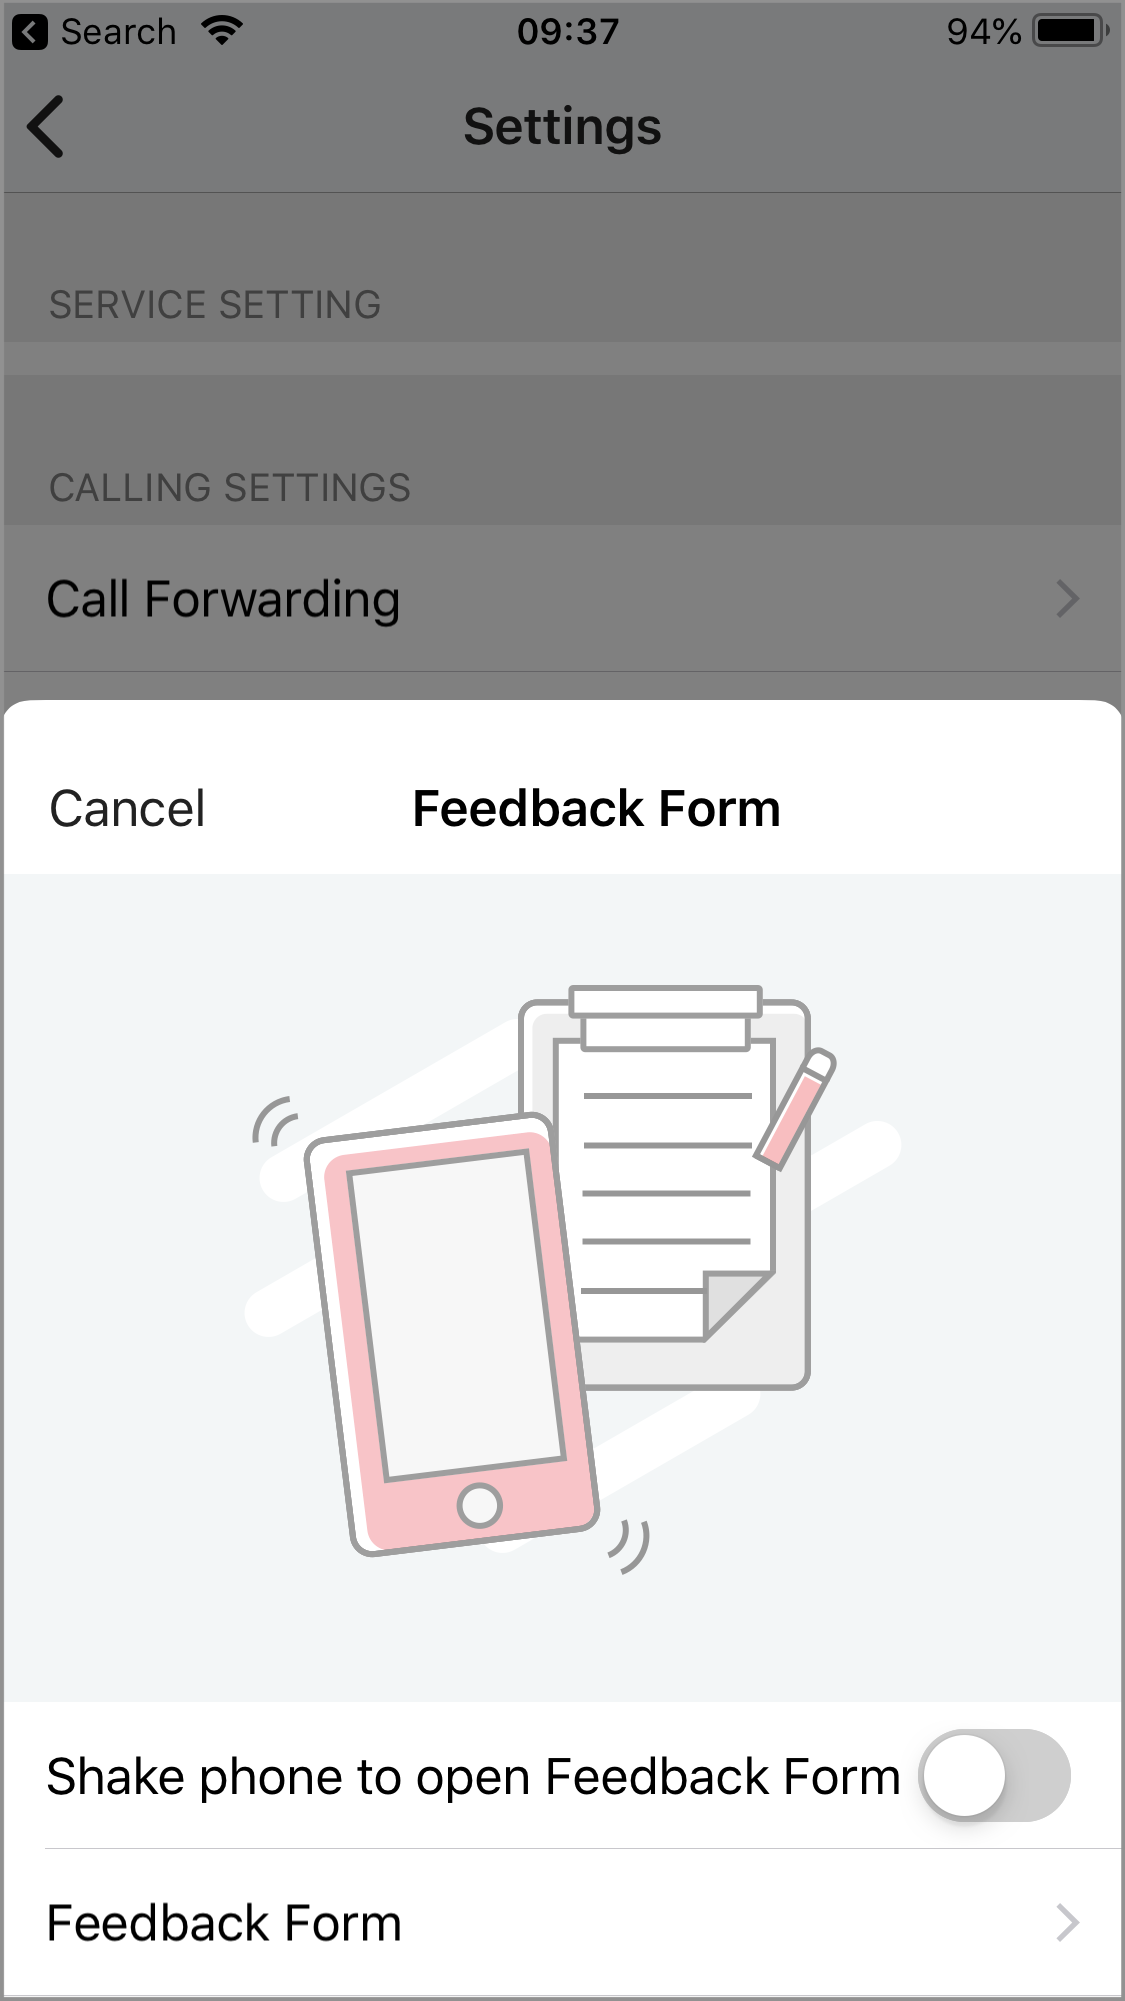 Disable Shake Phone to Open Feedback Form